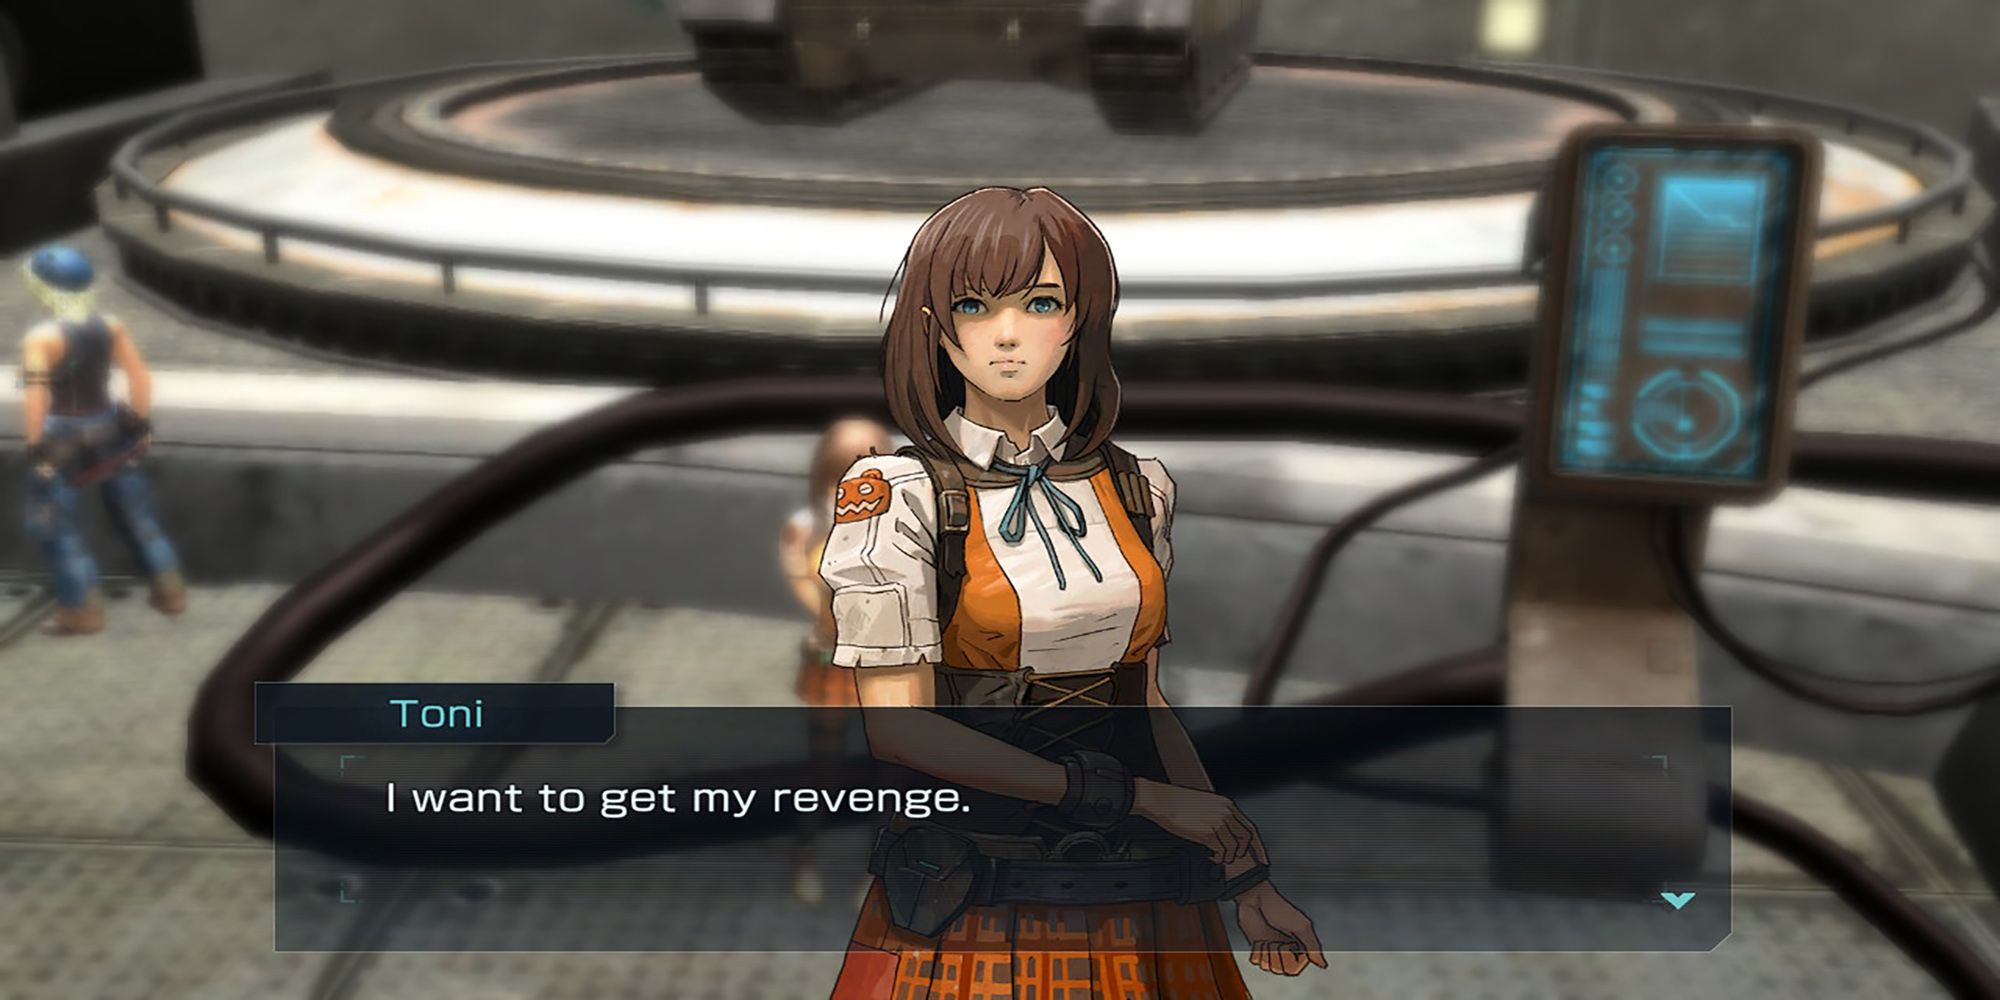 In a conversation at Iron Base, Toni expresses to Talis that she wants revenge against the monsters that killed her family in Metal Max Xeno Reborn.